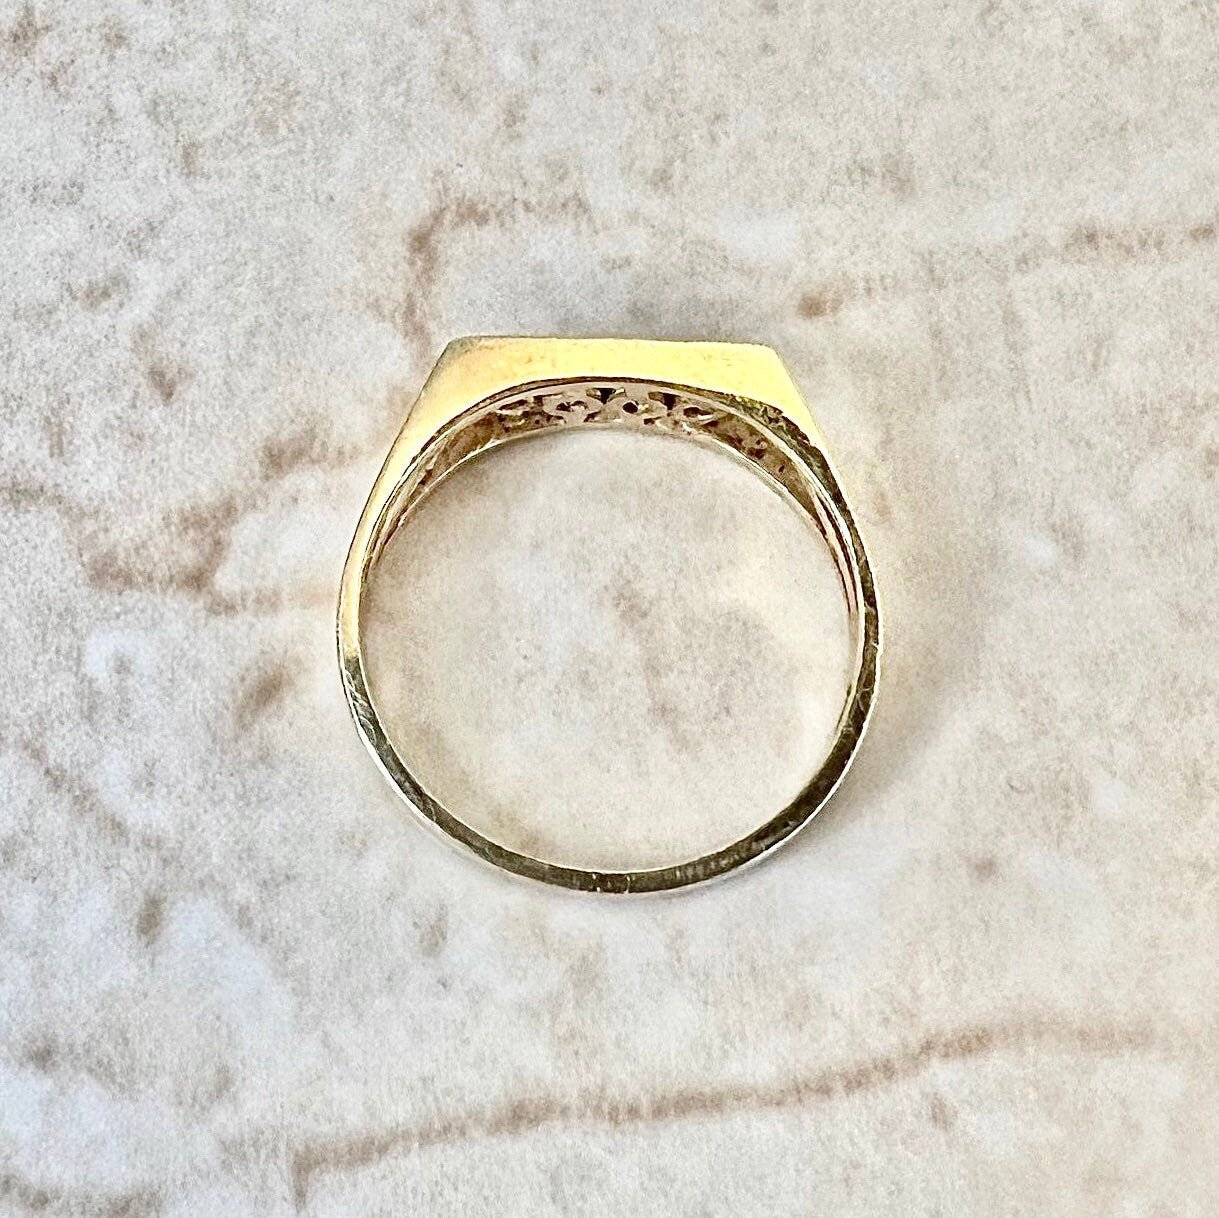 Vintage 14K 4 Stone Diamond Band Ring - Yellow Gold Wedding Ring - Cocktail Ring - Anniversary Ring - Best Gift For Her - Jewelry Sale